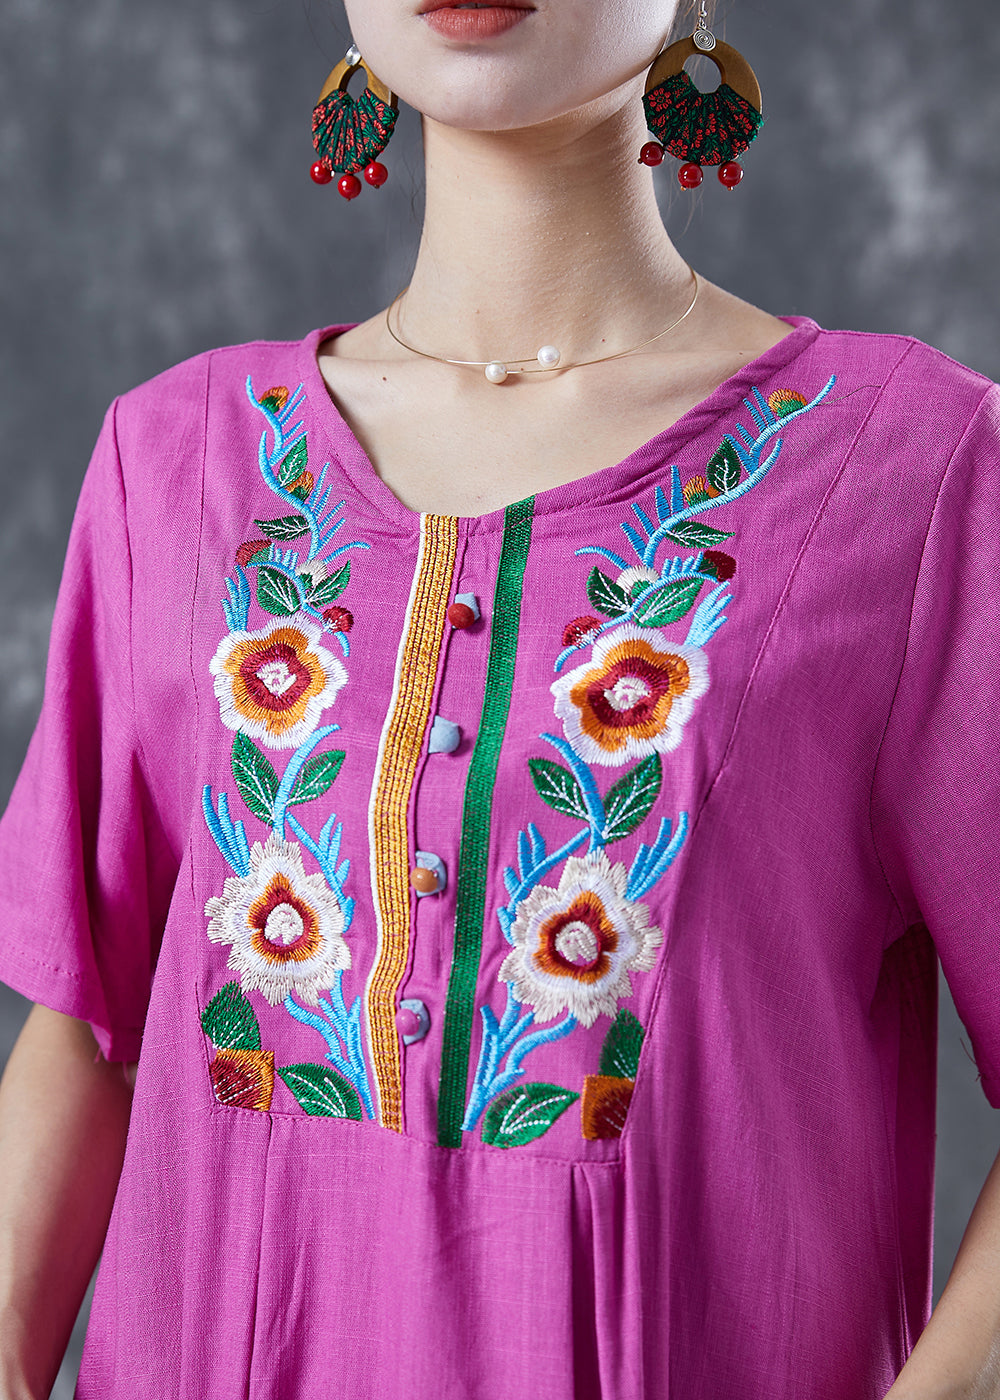 Unique Rose Embroideried Pockets Linen Holiday Dress Summer LY5630 - fabuloryshop